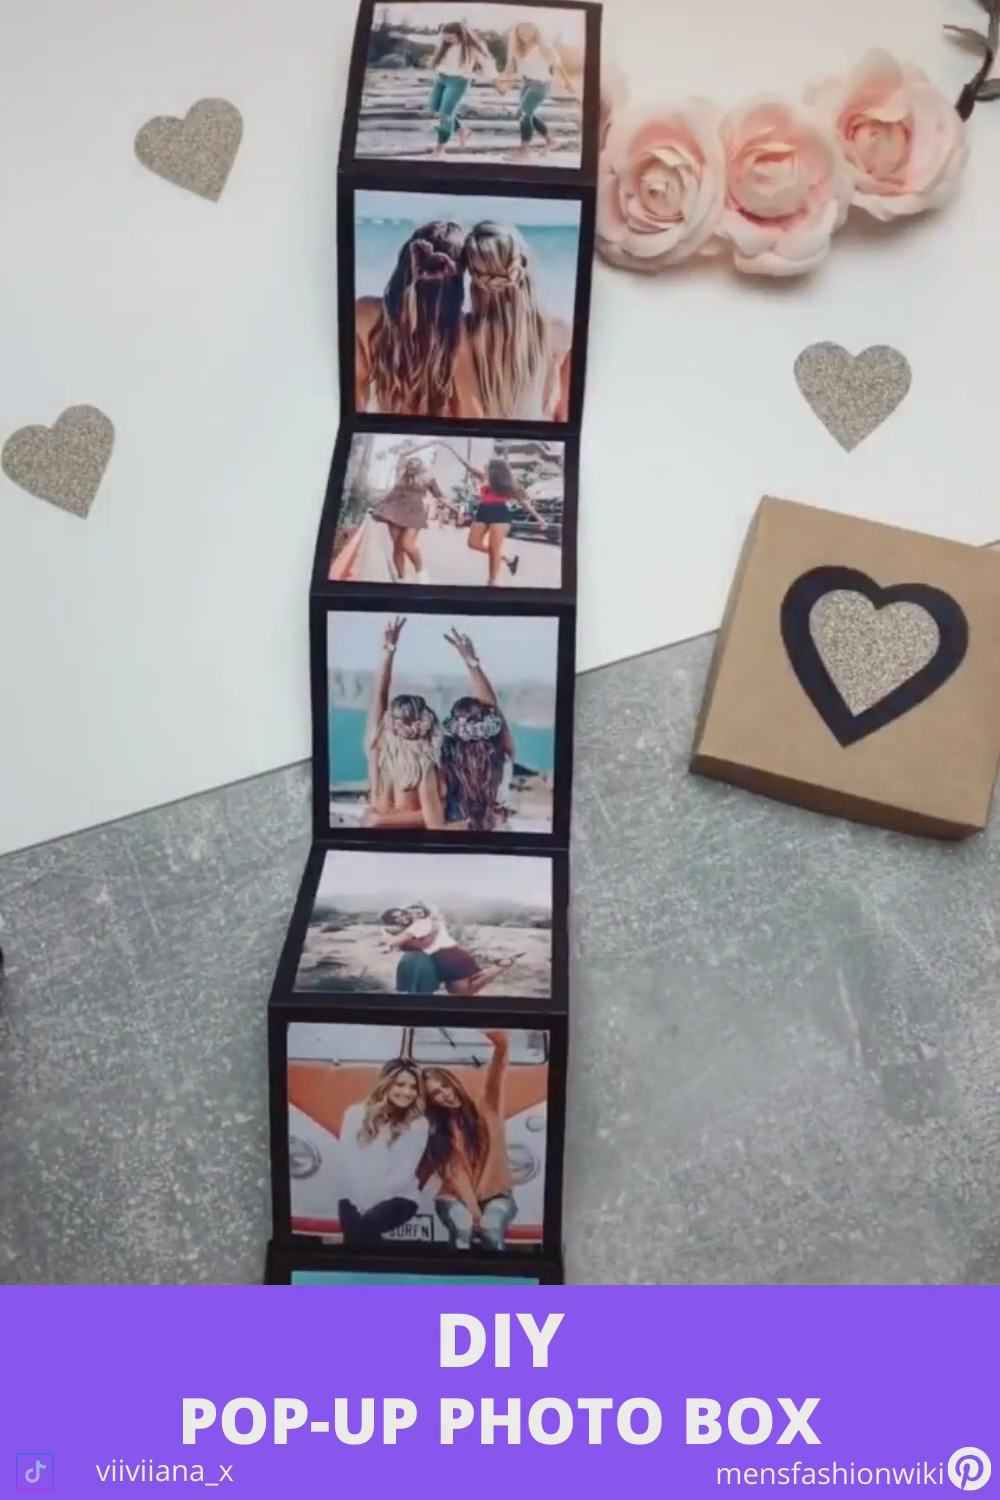 Best friend gift ideas - Photo shoot box -   diy Gifts for friends